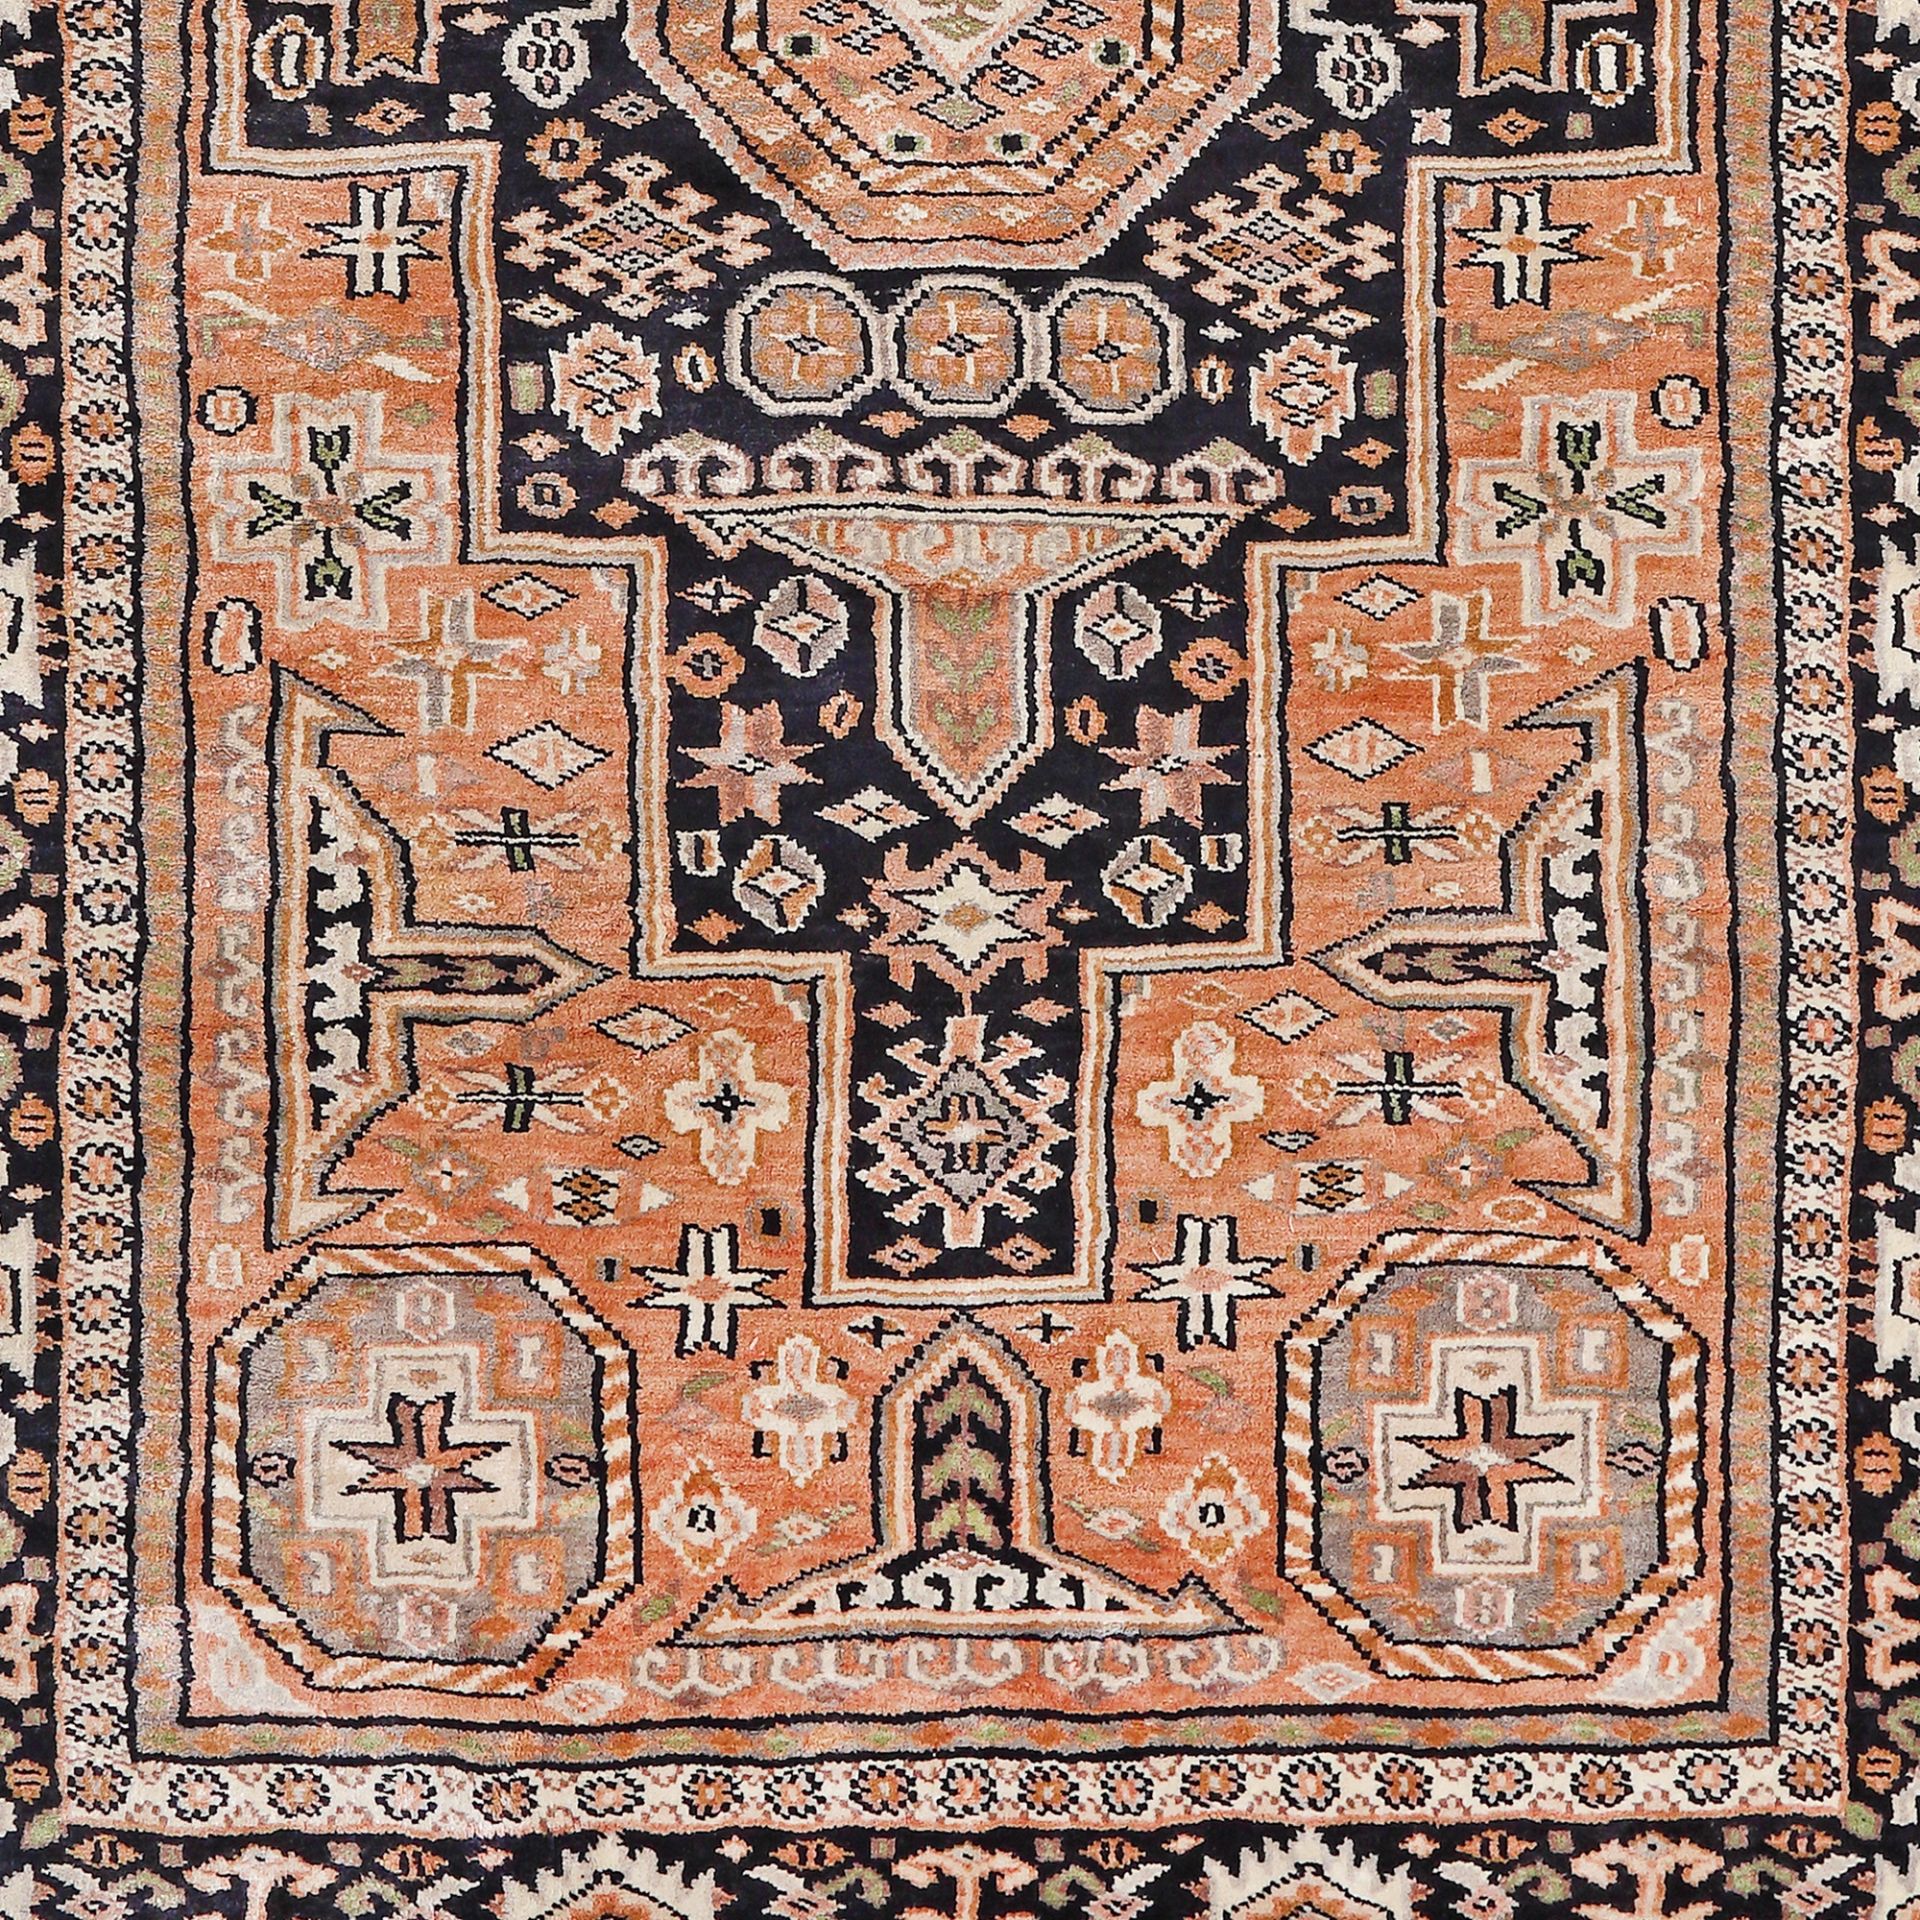 Cotton and silk rug, decorated with tribal motifs, Caucasus, mid-20th century - Image 2 of 2